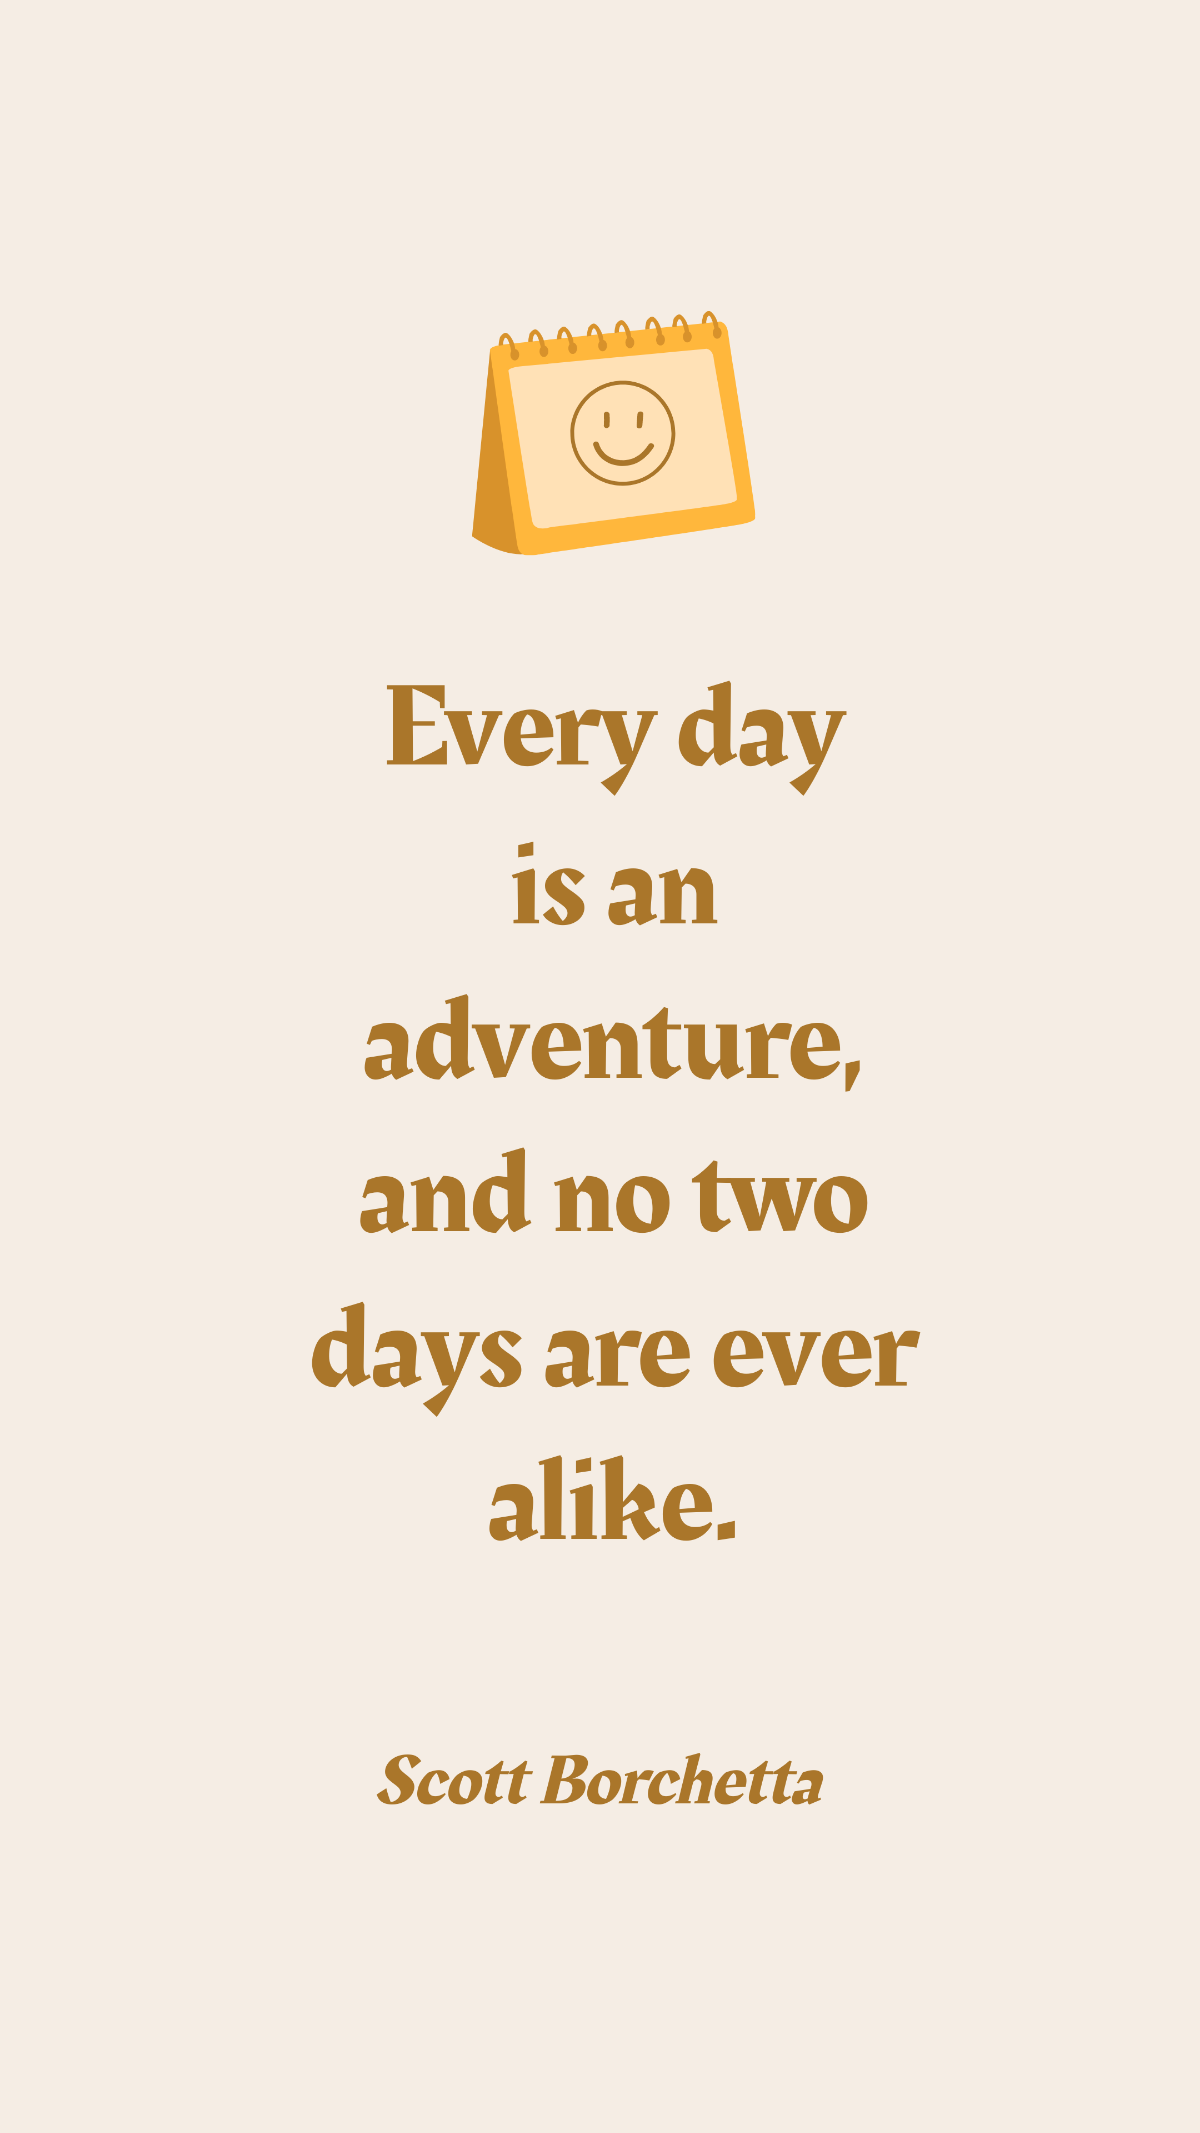 Scott Borchetta - Every day is an adventure, and no two days are ever alike. Template